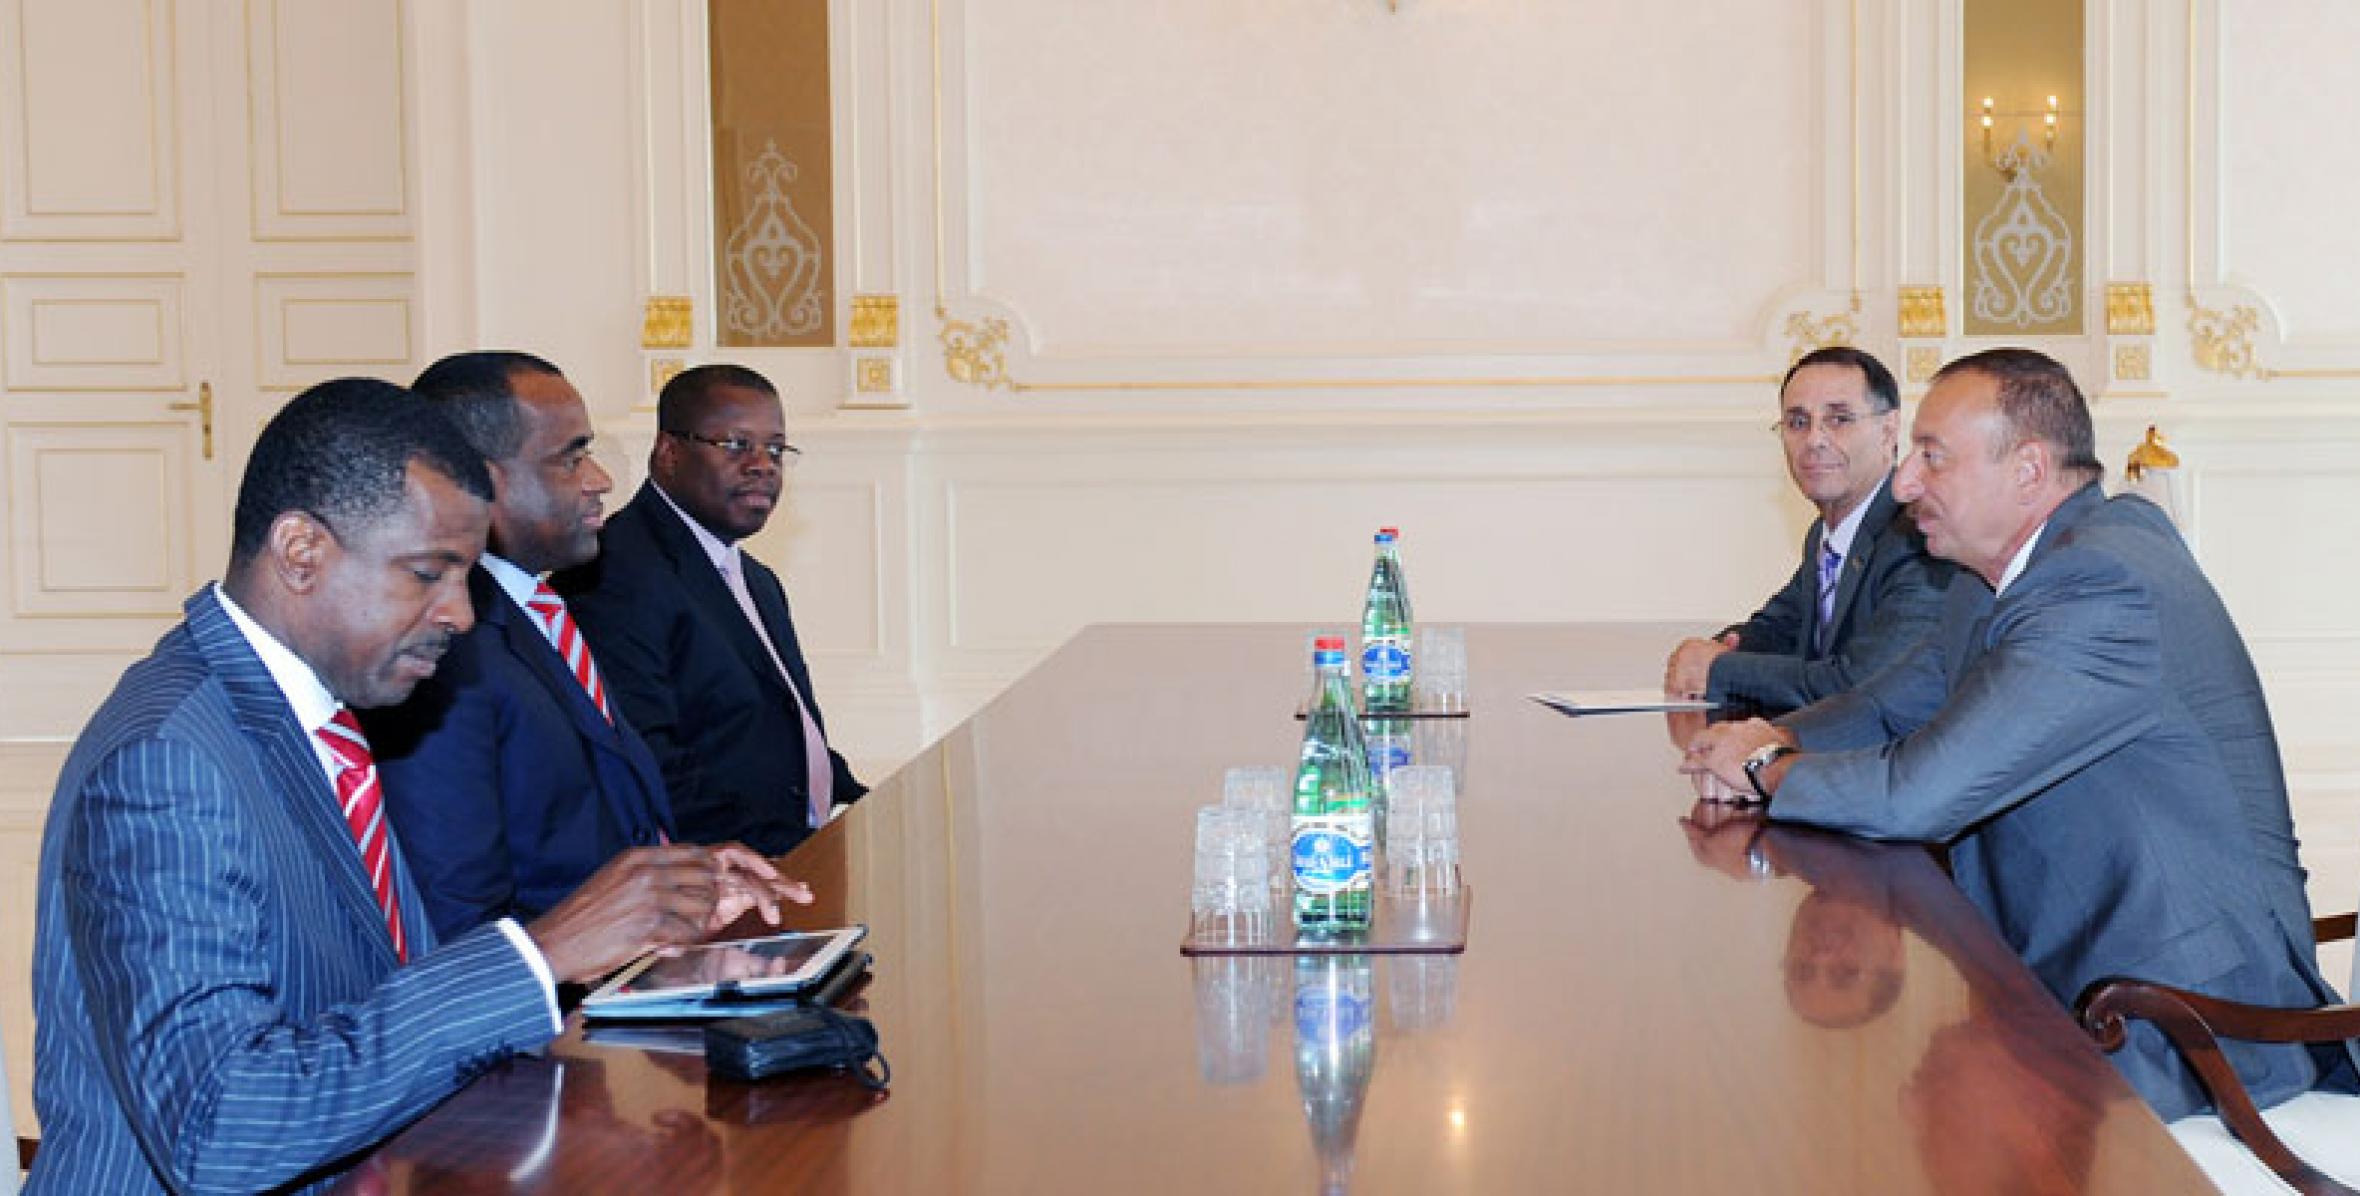 Ilham Aliyev received a delegation led by Prime Minister of the Commonwealth of Dominica Roosevelt Skerrit